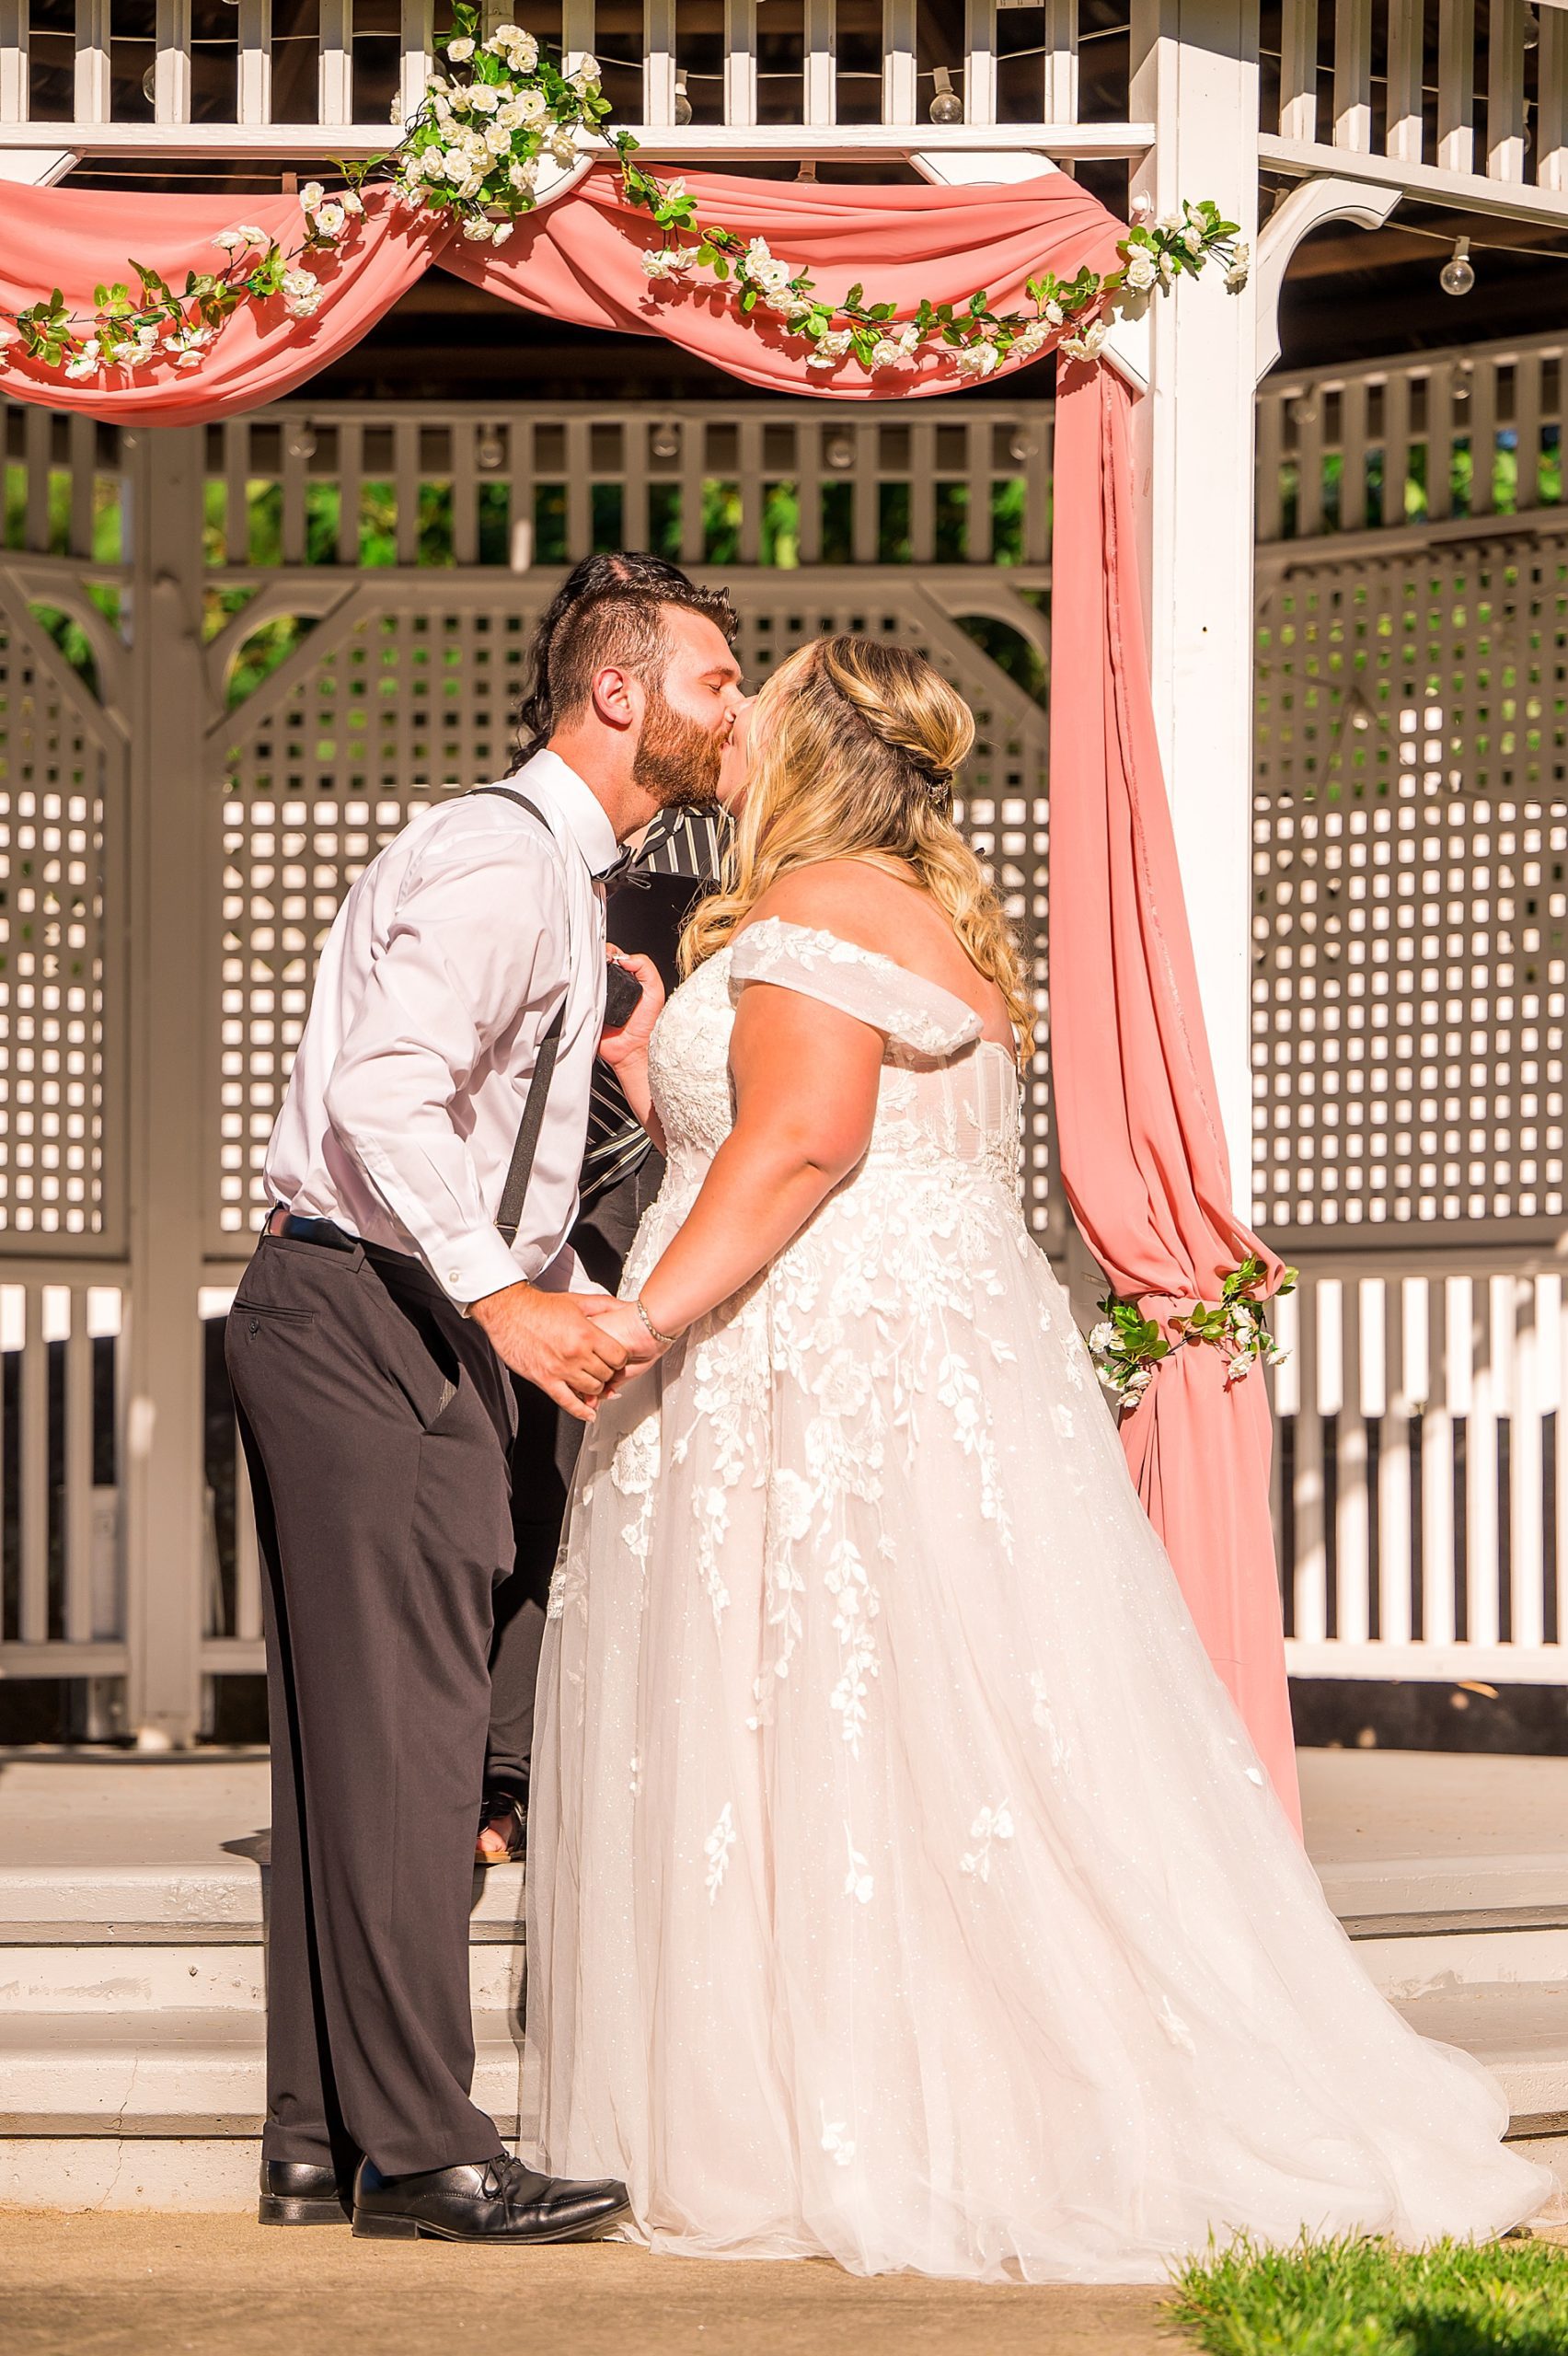 bride and groom kiss for the first time as husband and wife